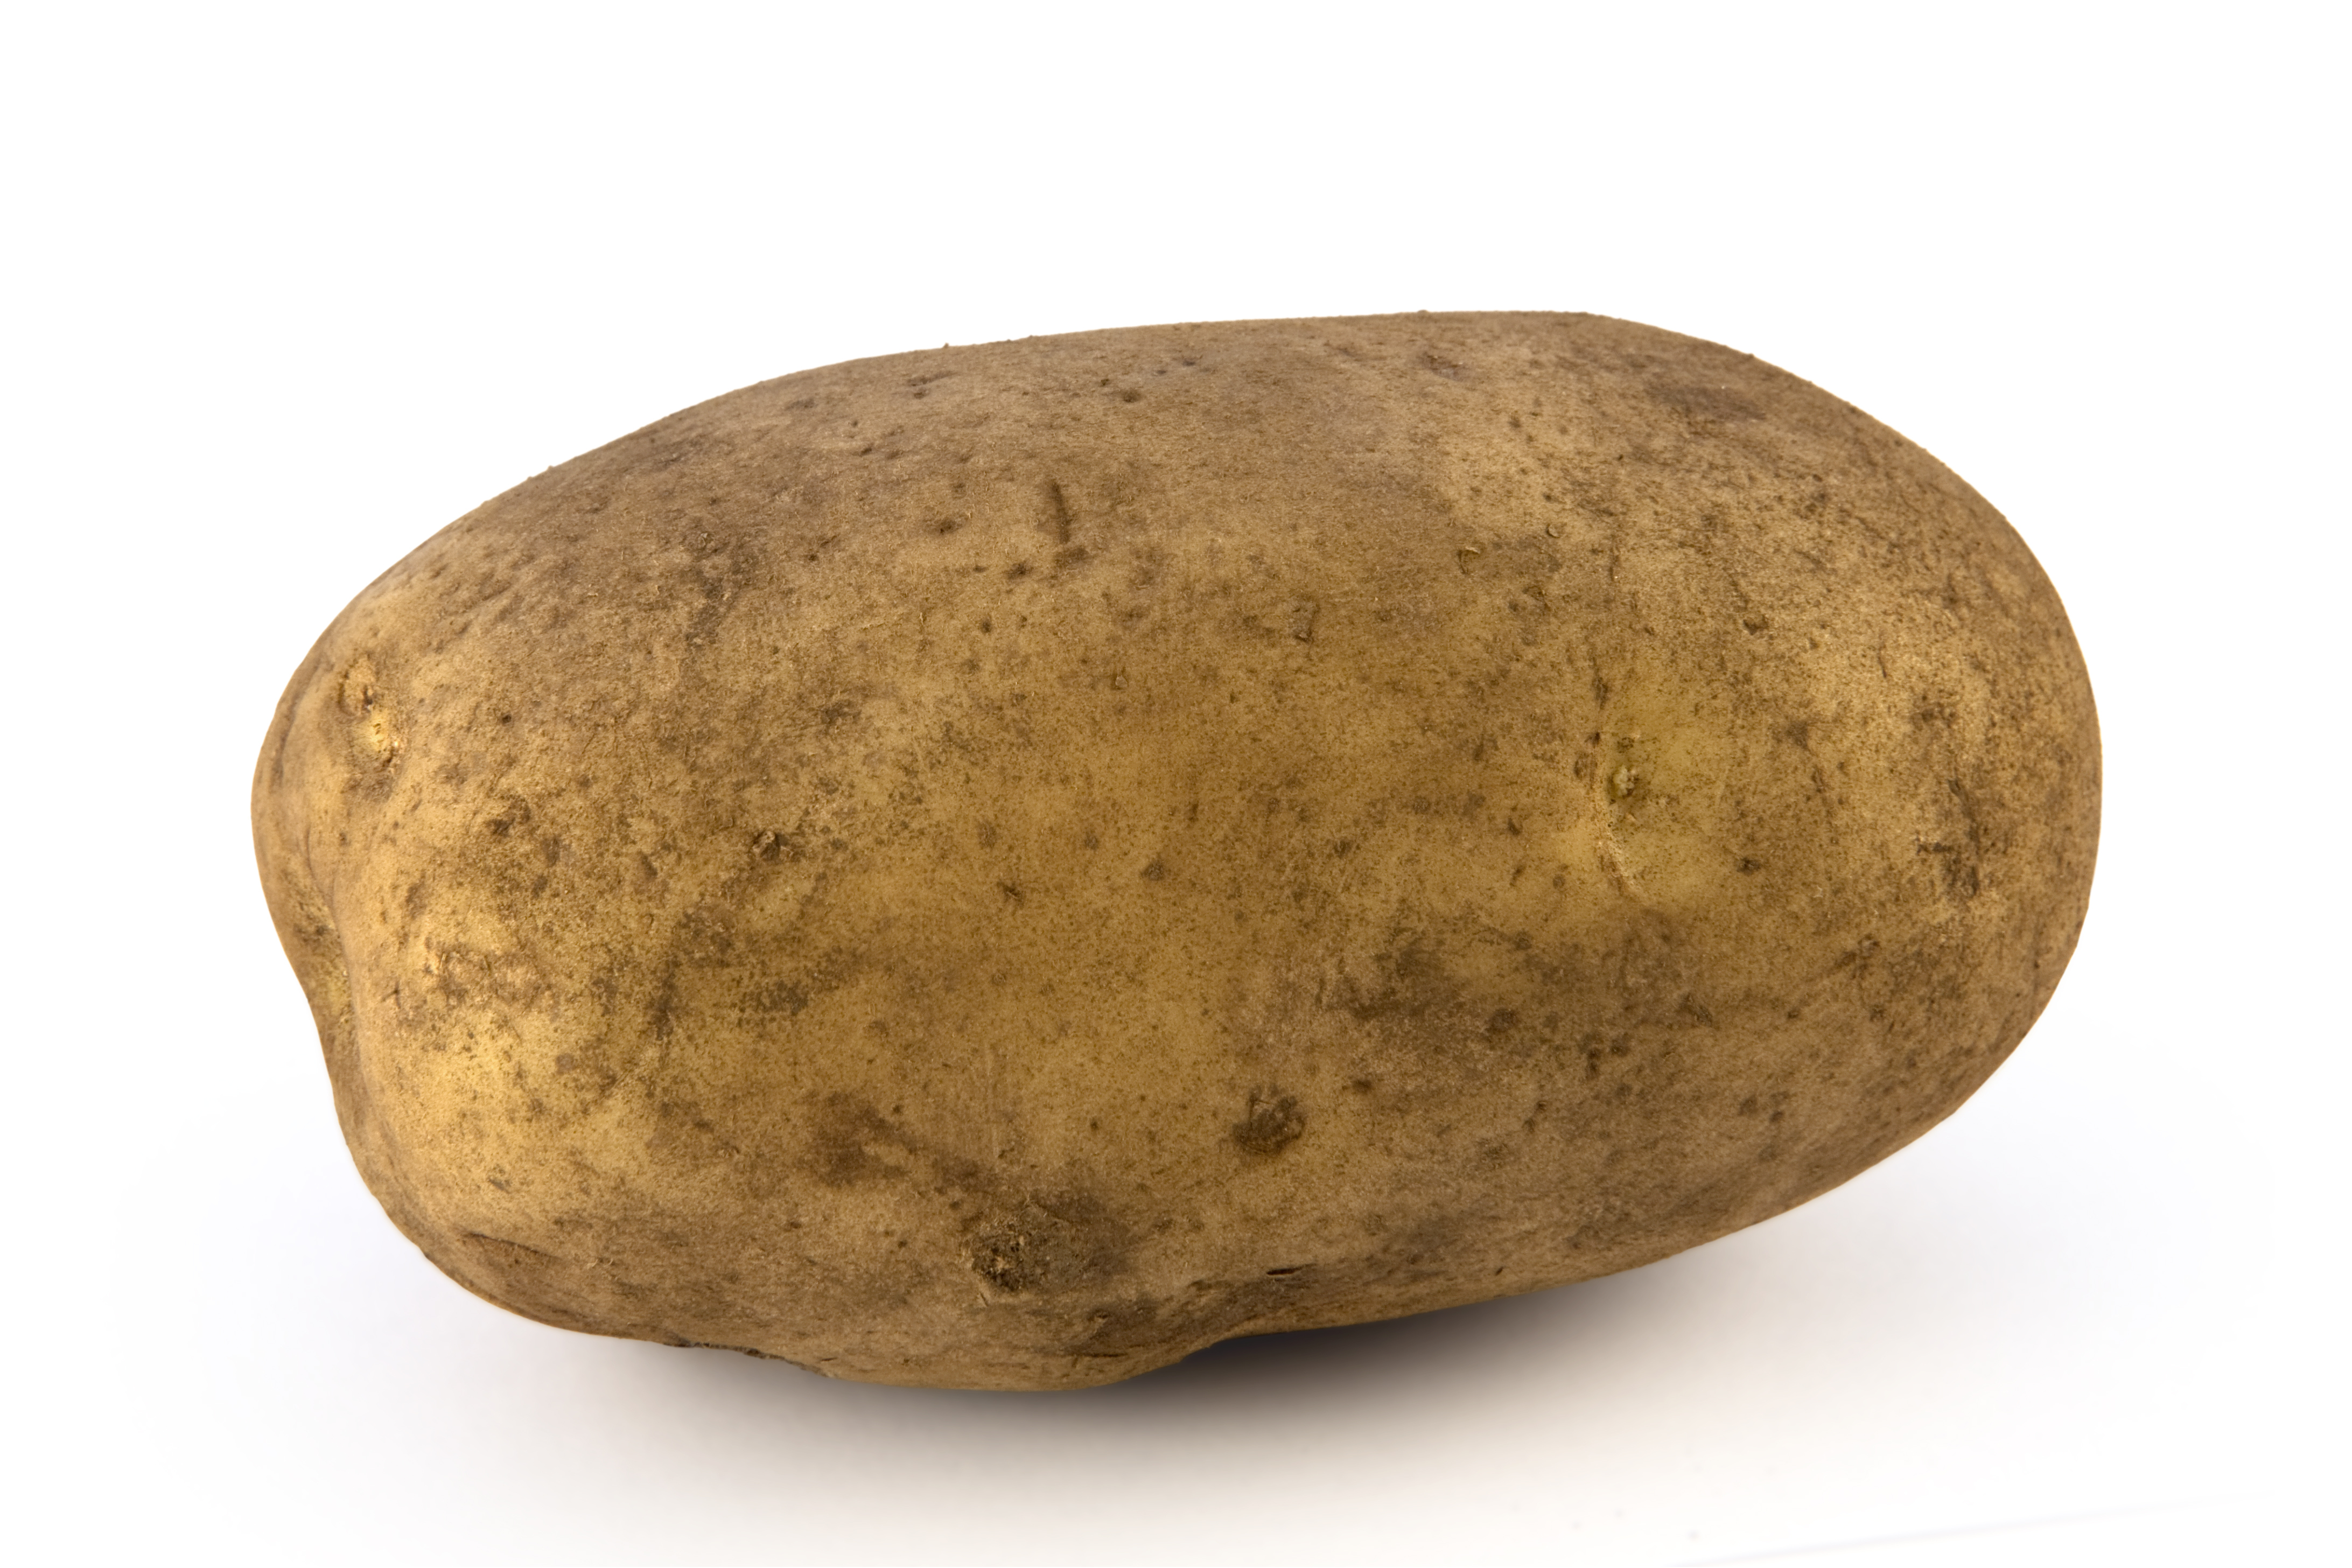 For $1 You Can Send Peter Dutton A Dirty Potato To Support Refugees